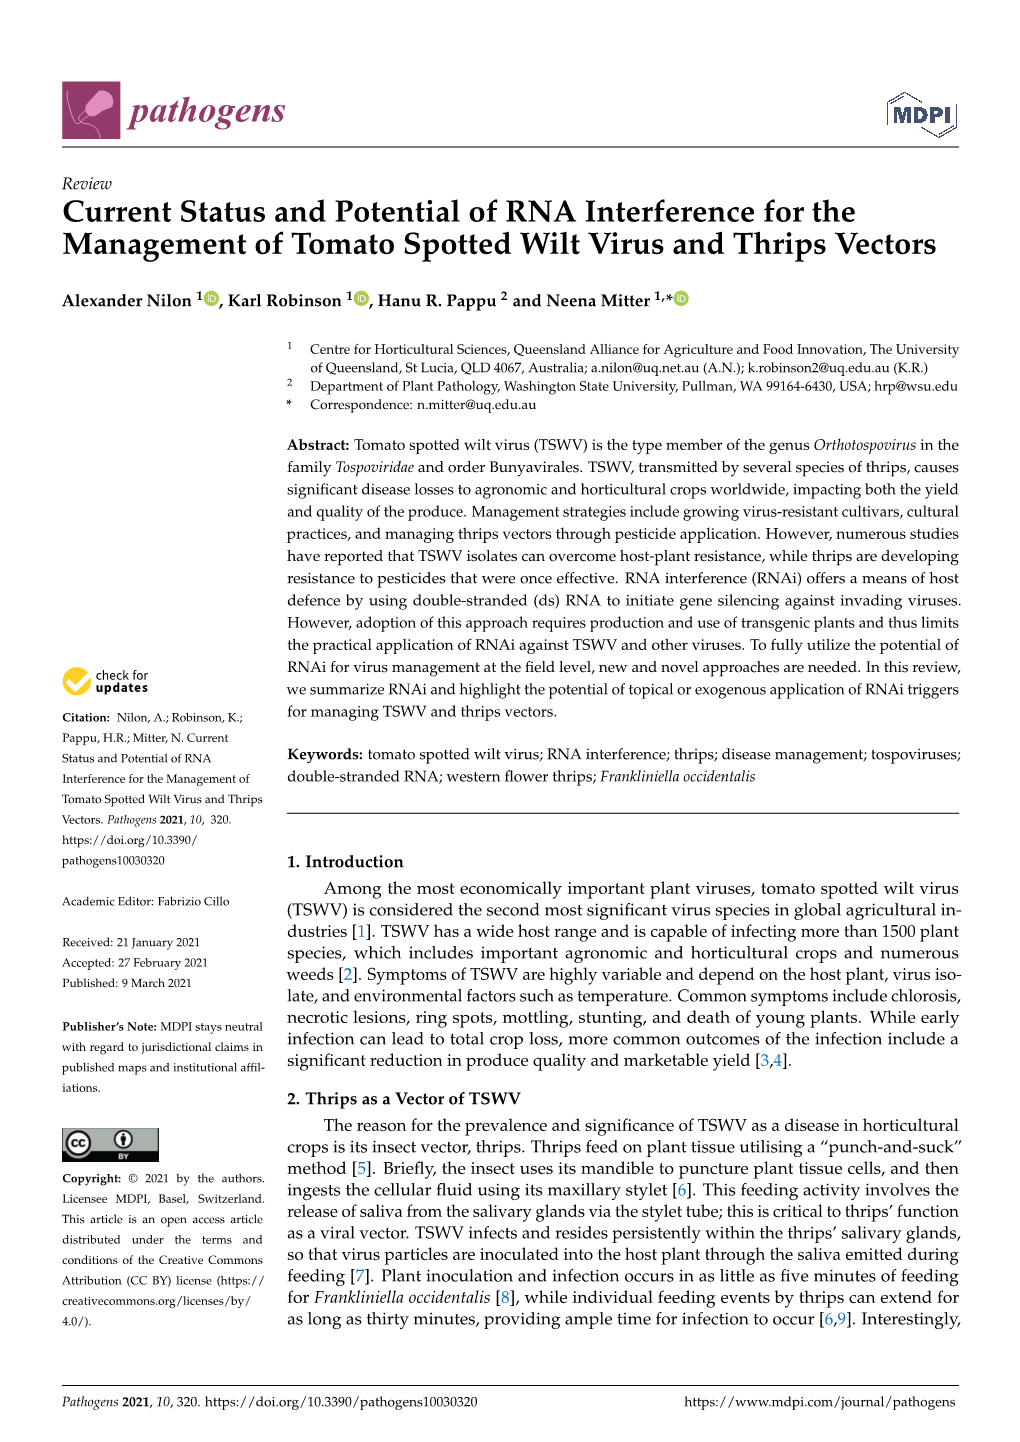 Current Status and Potential of RNA Interference for the Management of Tomato Spotted Wilt Virus and Thrips Vectors